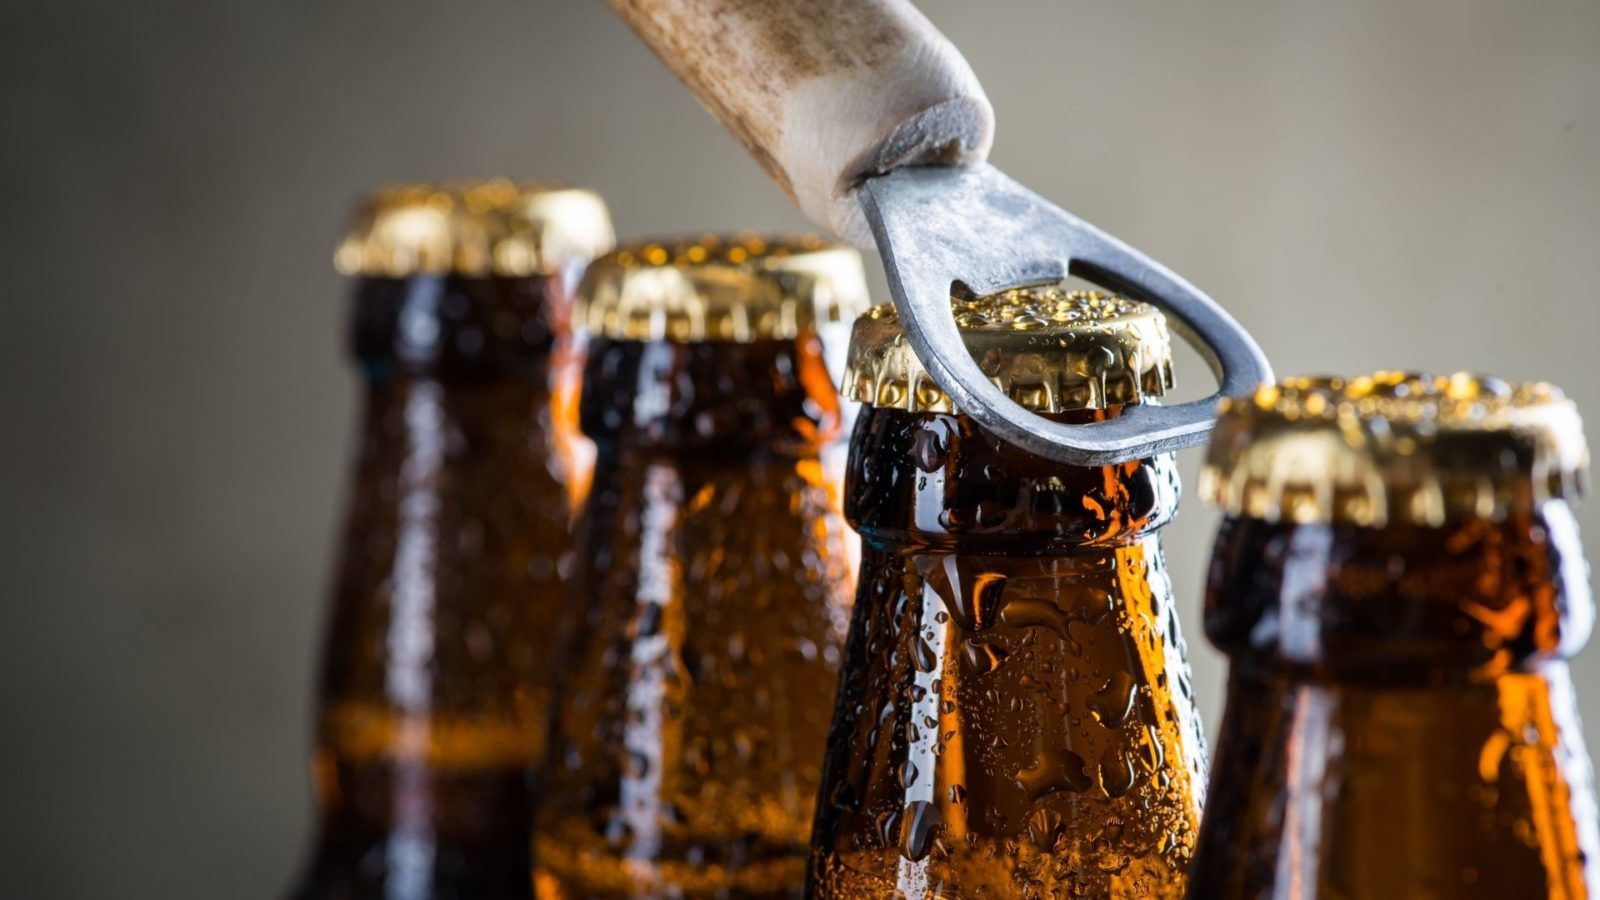 Classic to craft: 12 best beers in India under Rs 200 for your at-home hop collection